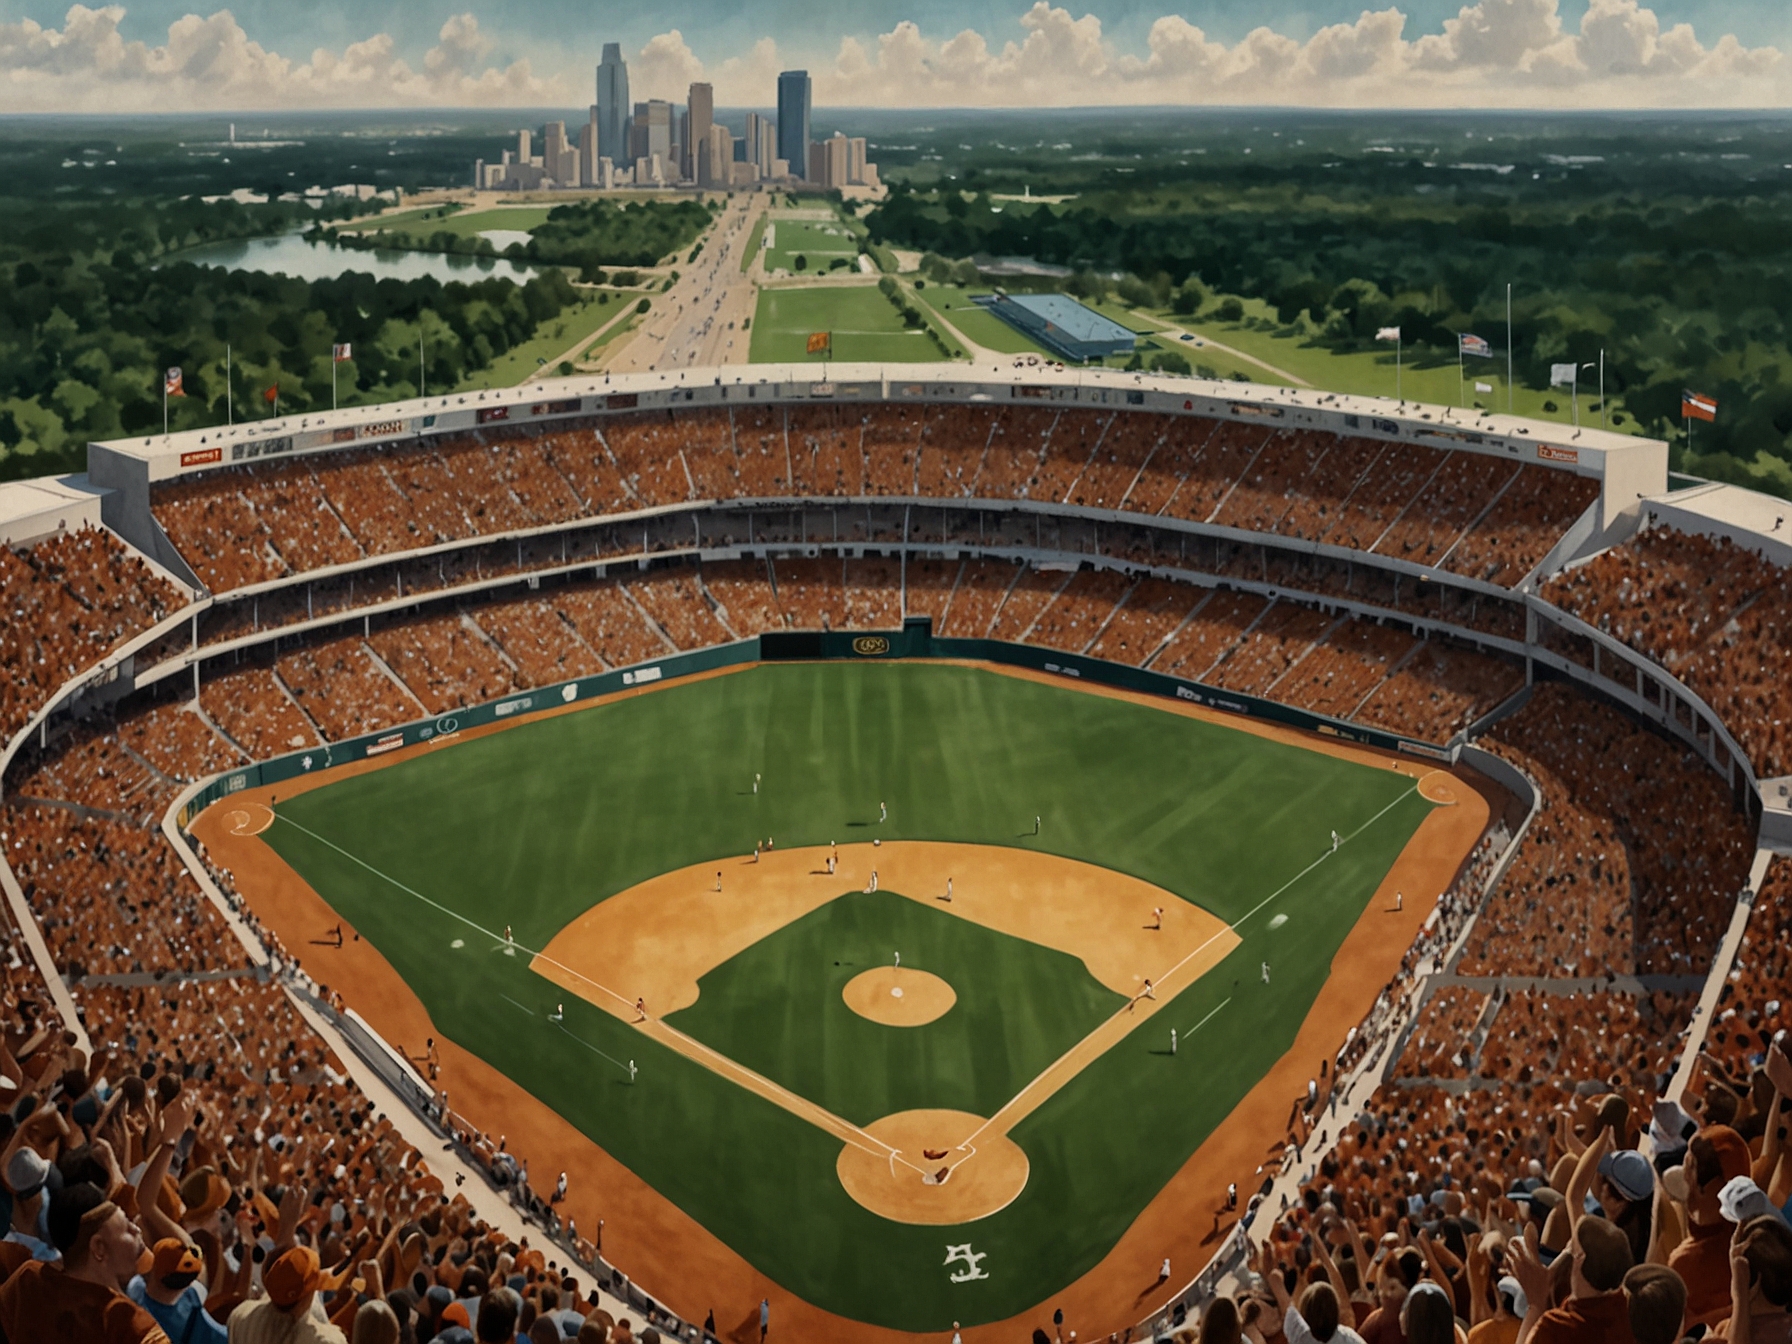 An aerial view of Texas Longhorns' baseball stadium with fans filling the stands, ready to embrace the new era under Jim Schlossnagle's leadership, poised for the challenges of the SEC.